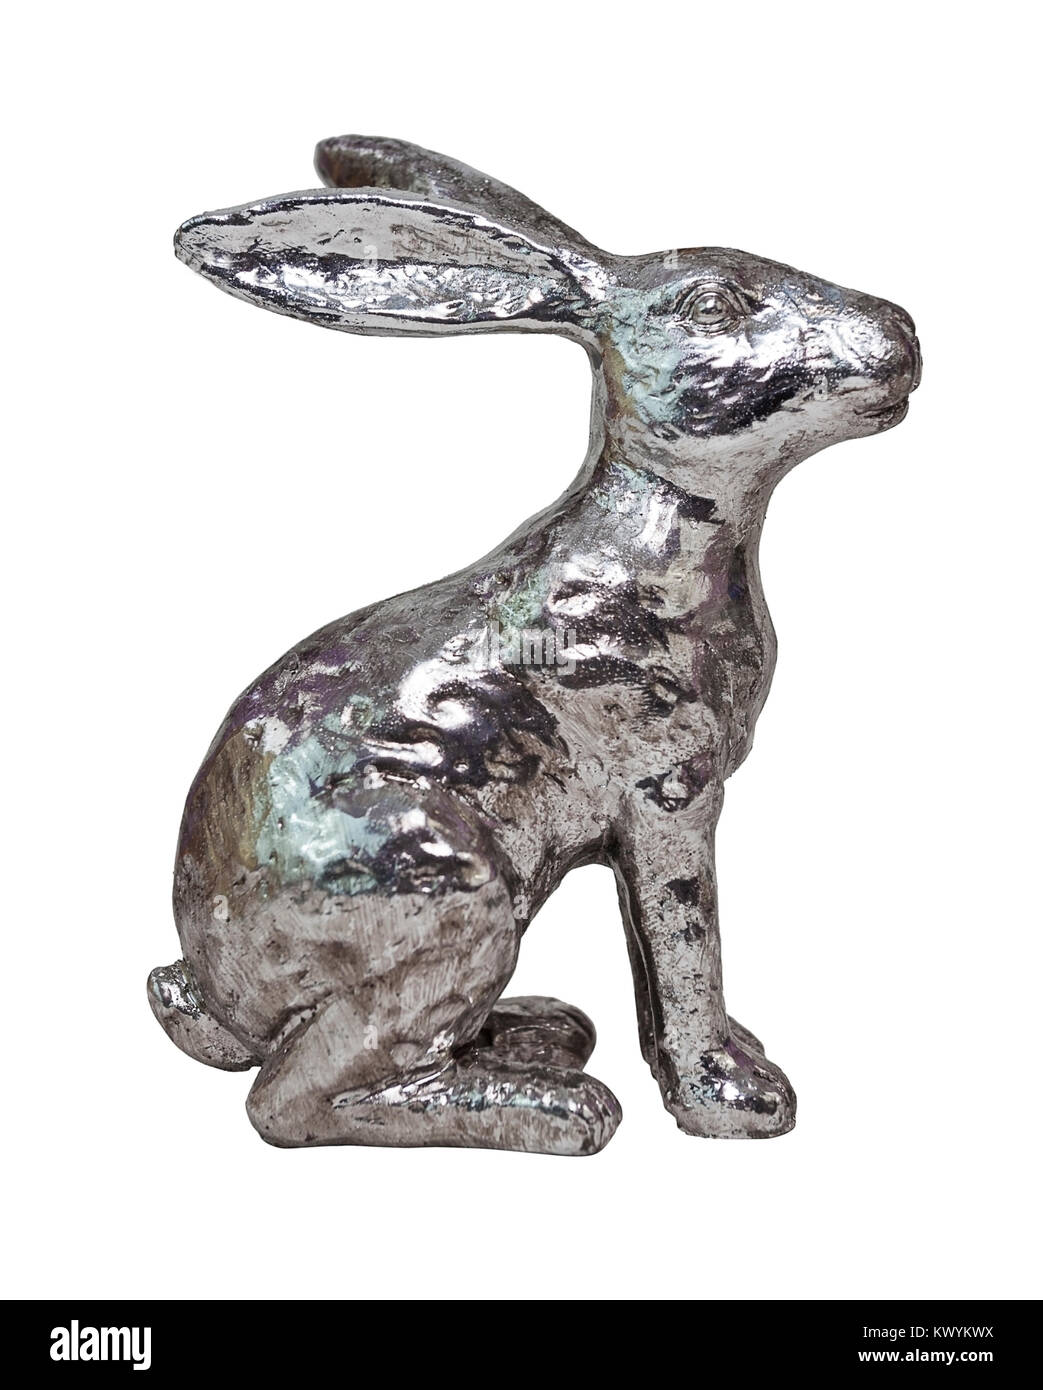 Front view of shiny metallic coated Easter bunny. Stock Photo